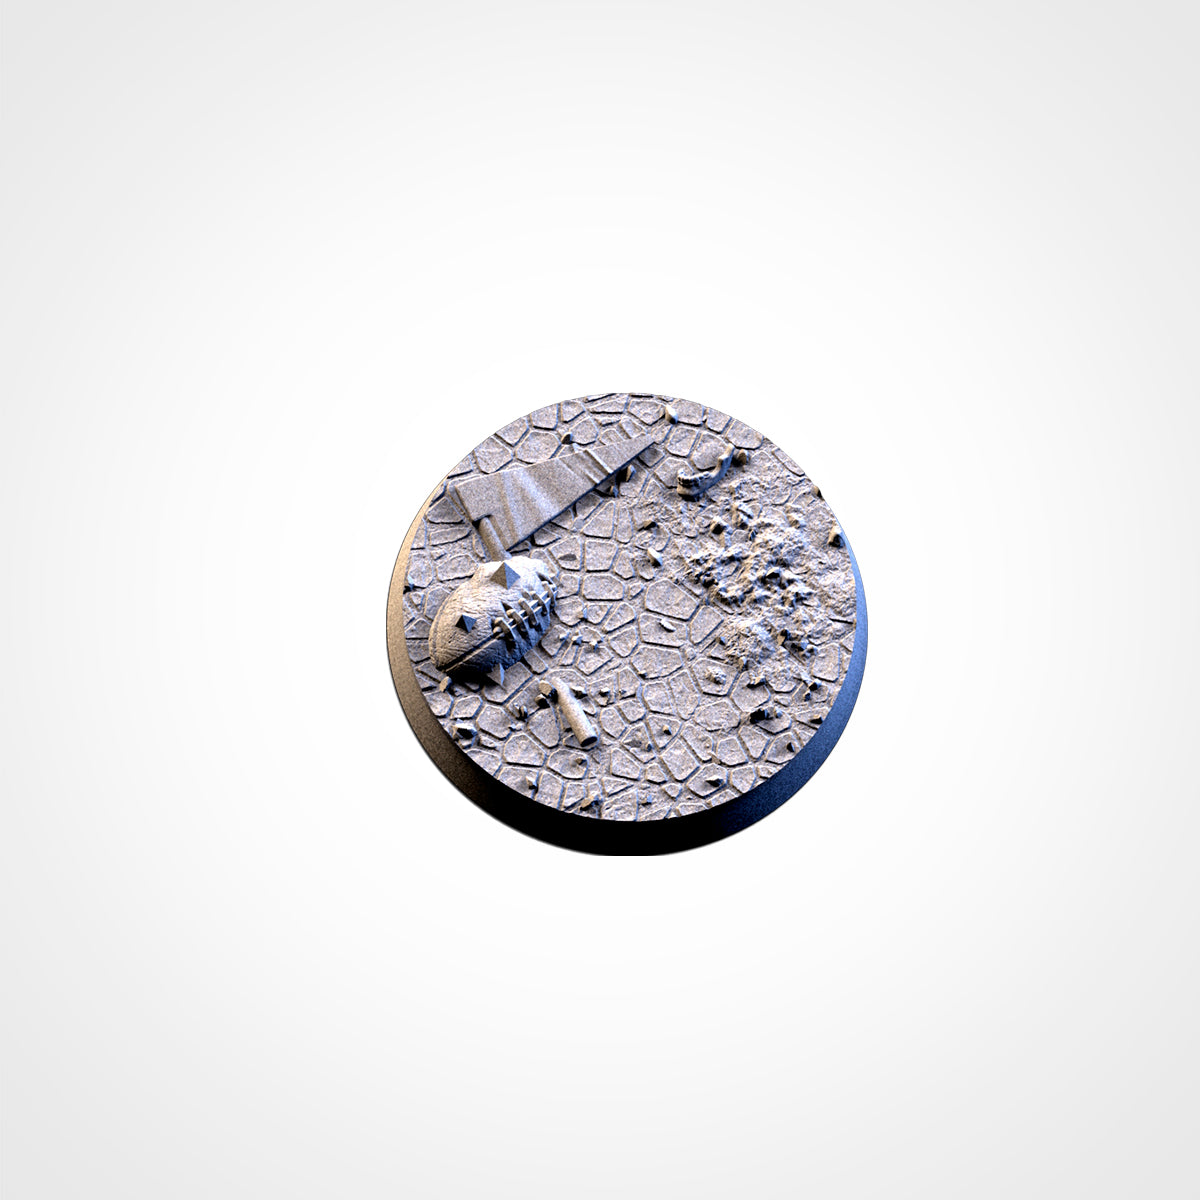 Fantasy Football Bases | 25mm | 32mm | 40mm | Txarli Factory | Magnetizable Scenic Textured Round